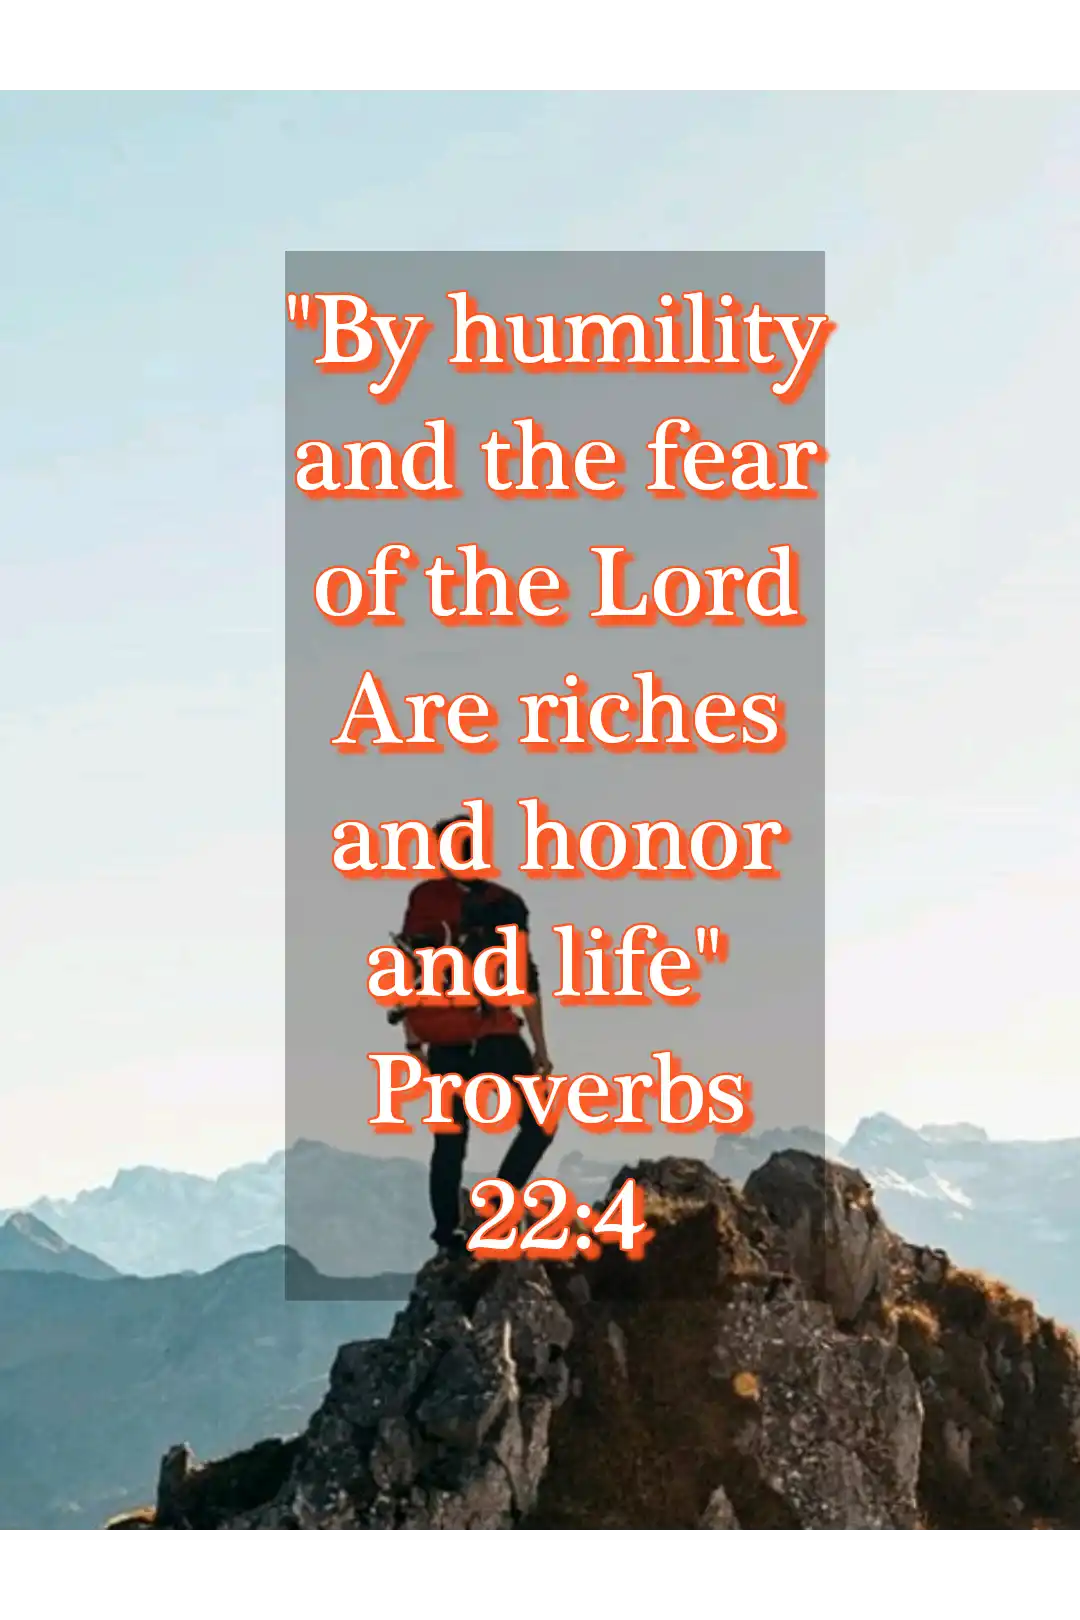 bible verses about humble (Proverbs 22:4)